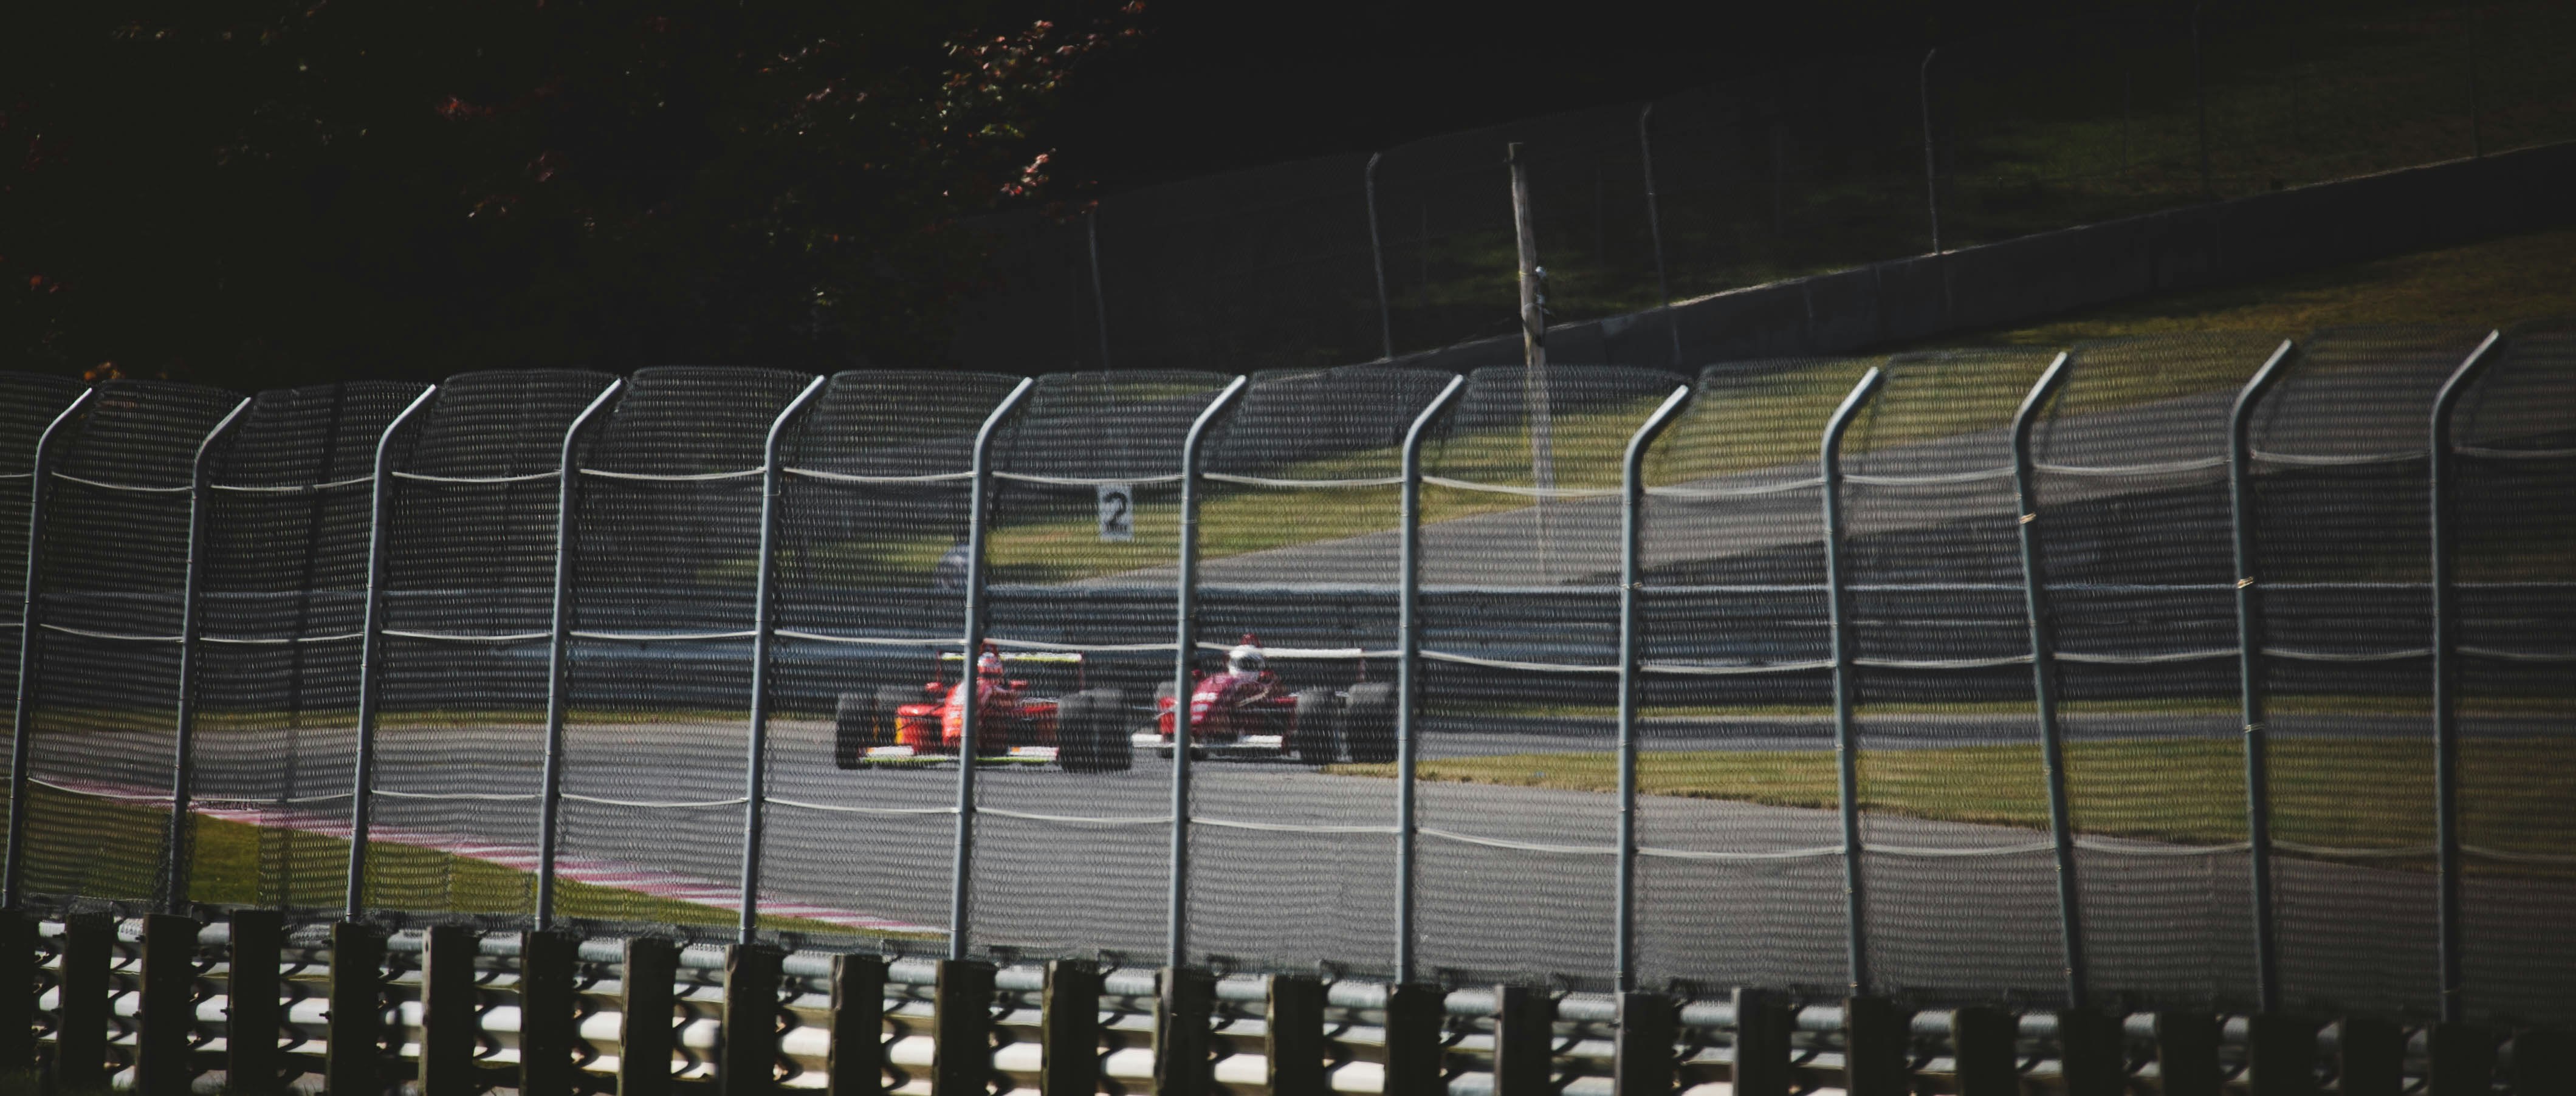 two red F1 cars on gray racetrack during daytime